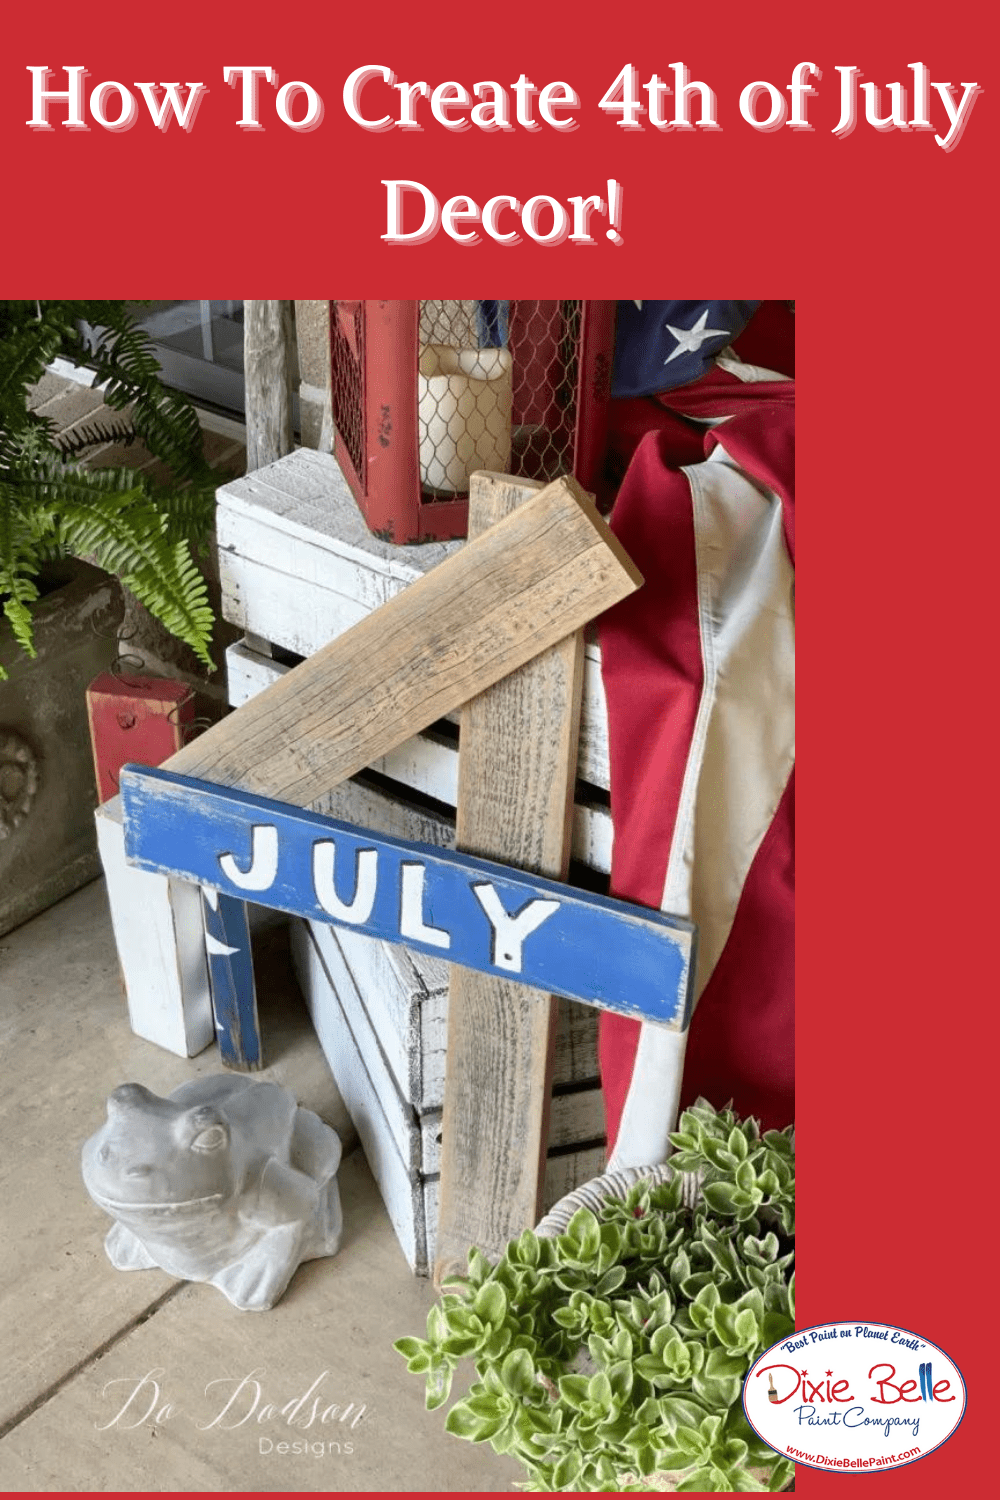 How To Create 4th of July Decor!